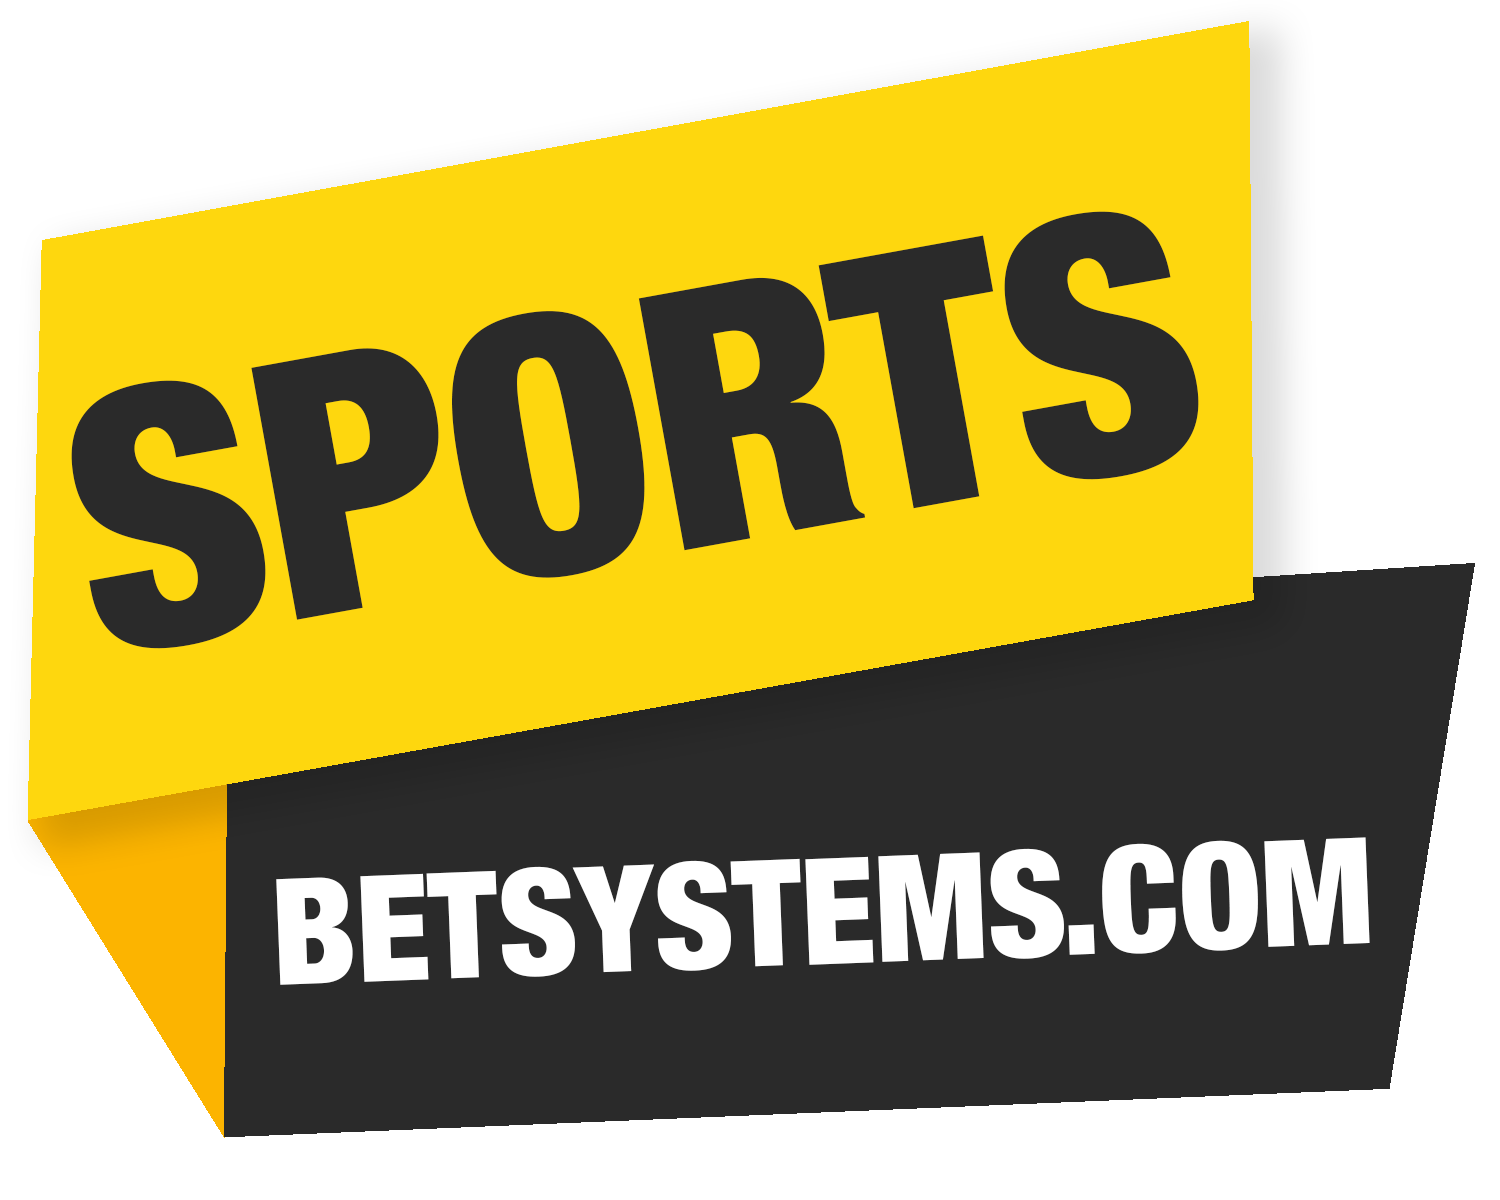 Sports Bet Systems